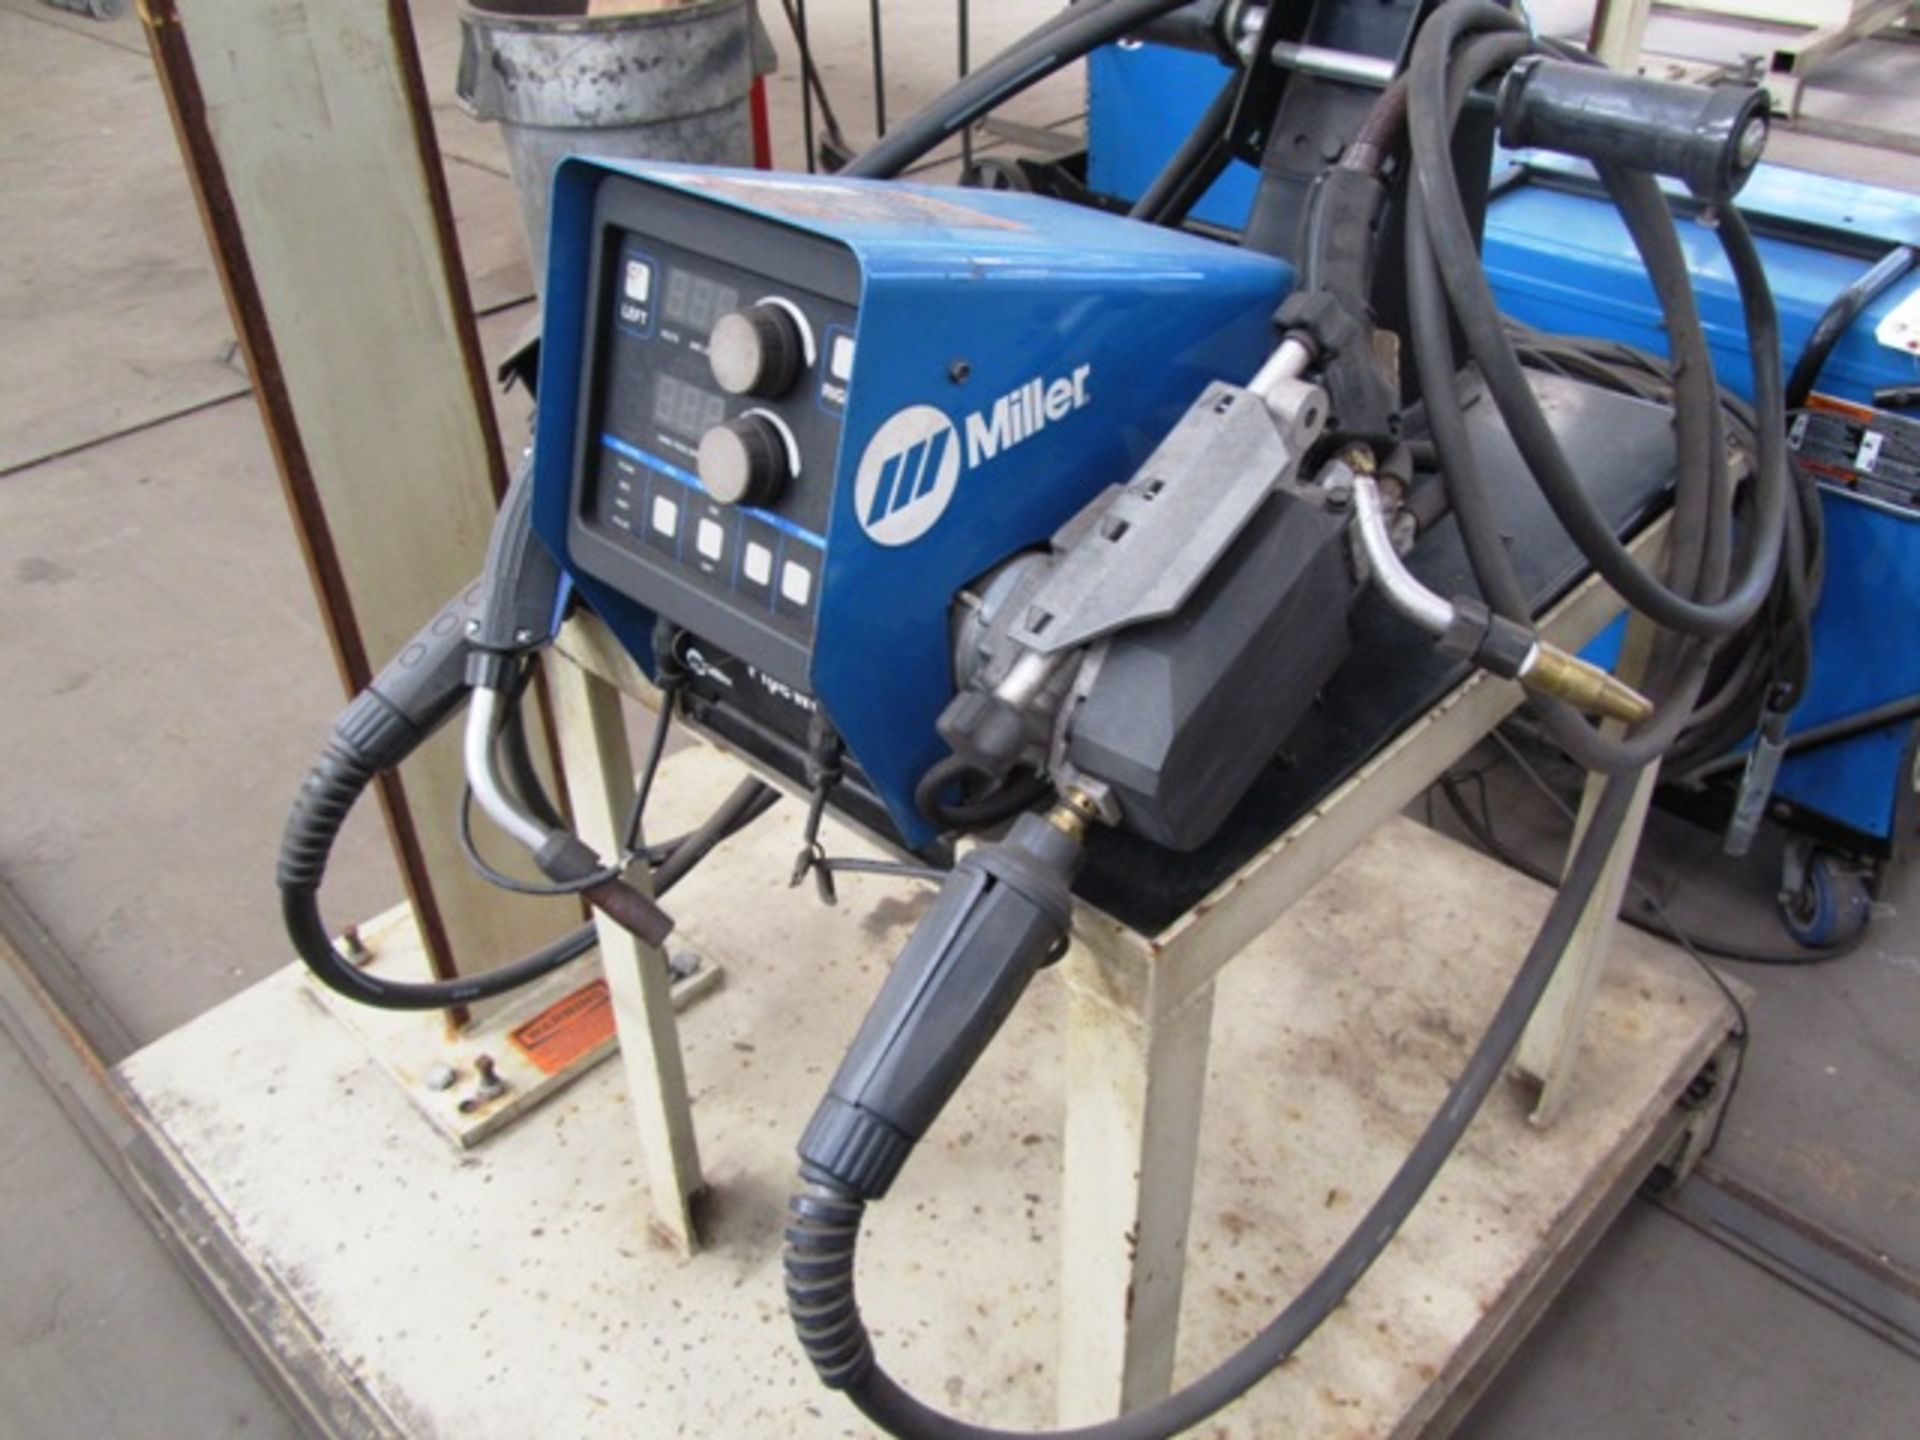 Miller PipeWorx 400 Portable Mig Welder with Miller PipeWorx Dual Wire Feeder, sn:MD150358G - Image 2 of 2